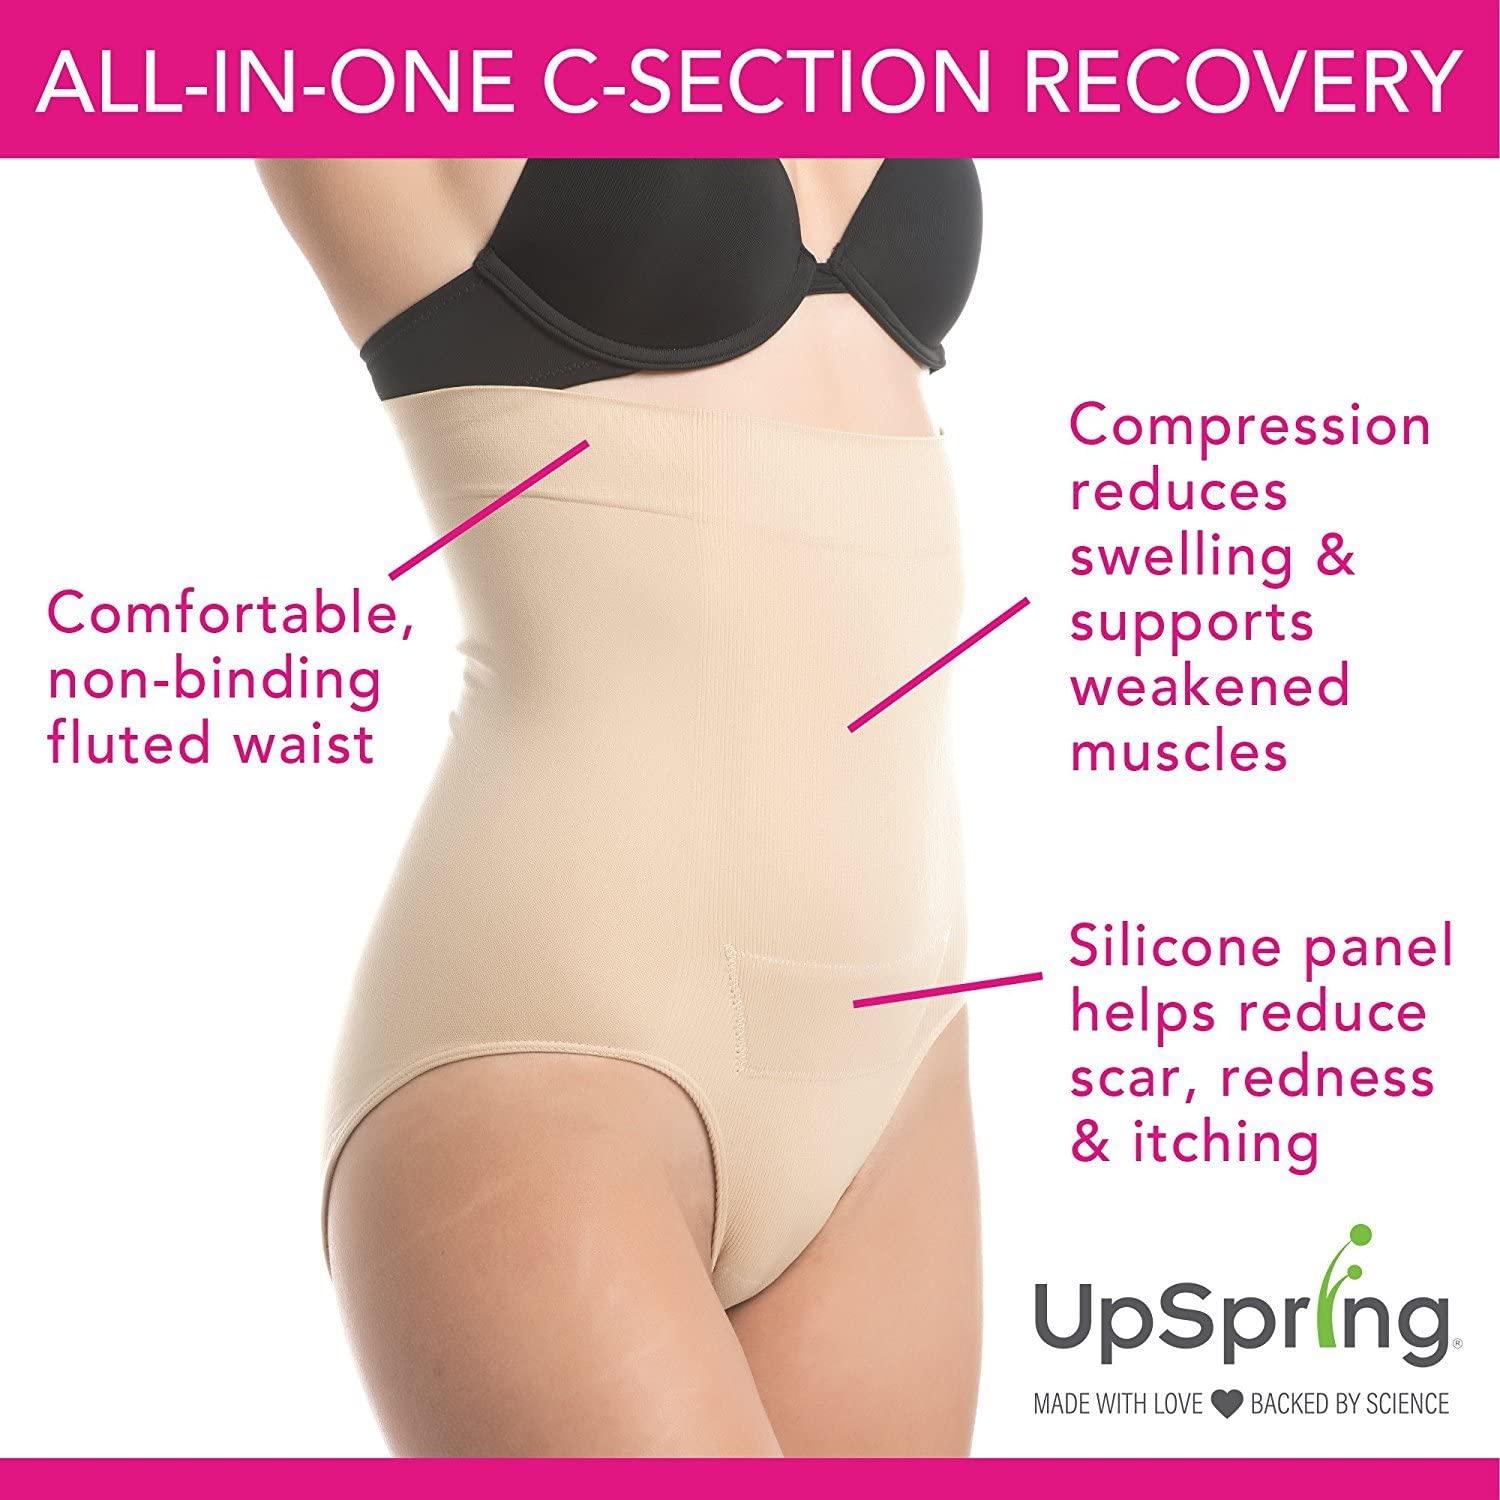 Knicker recommendations for after c section